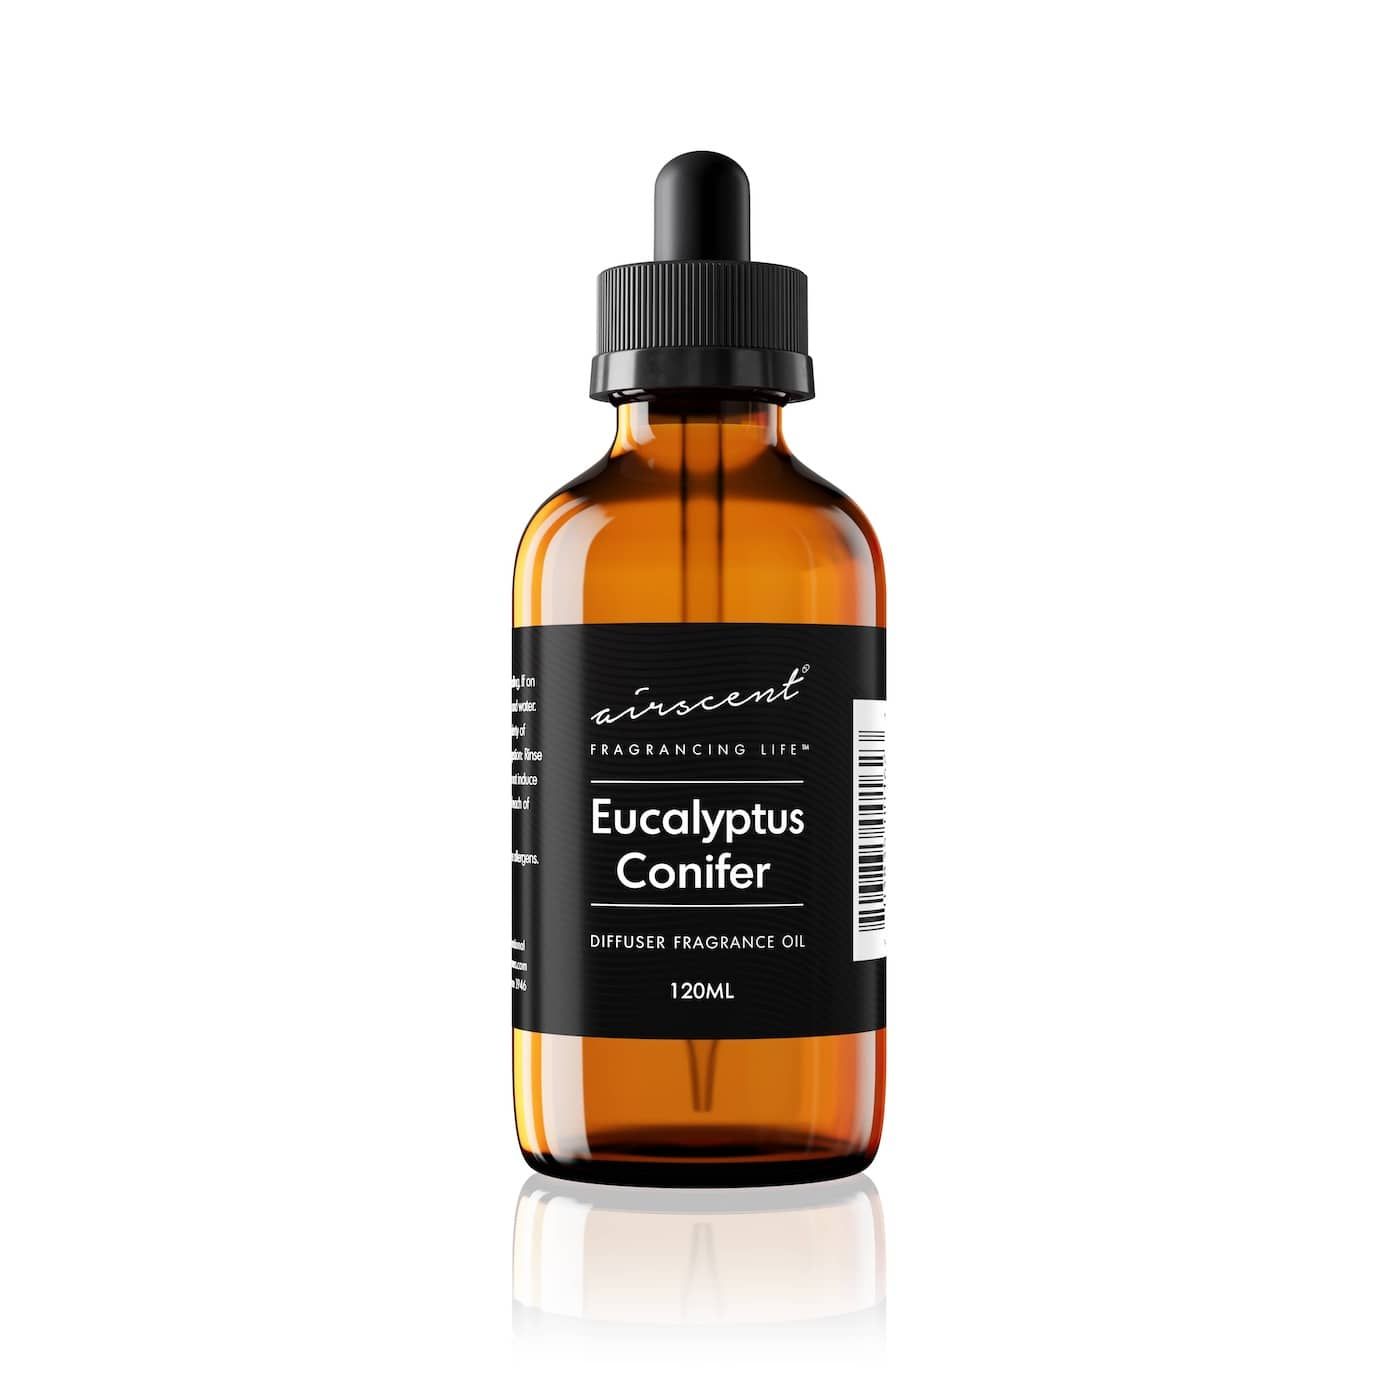 Eucalyptus Conifer Diffuser Oil for Aromatherapy Diffusers